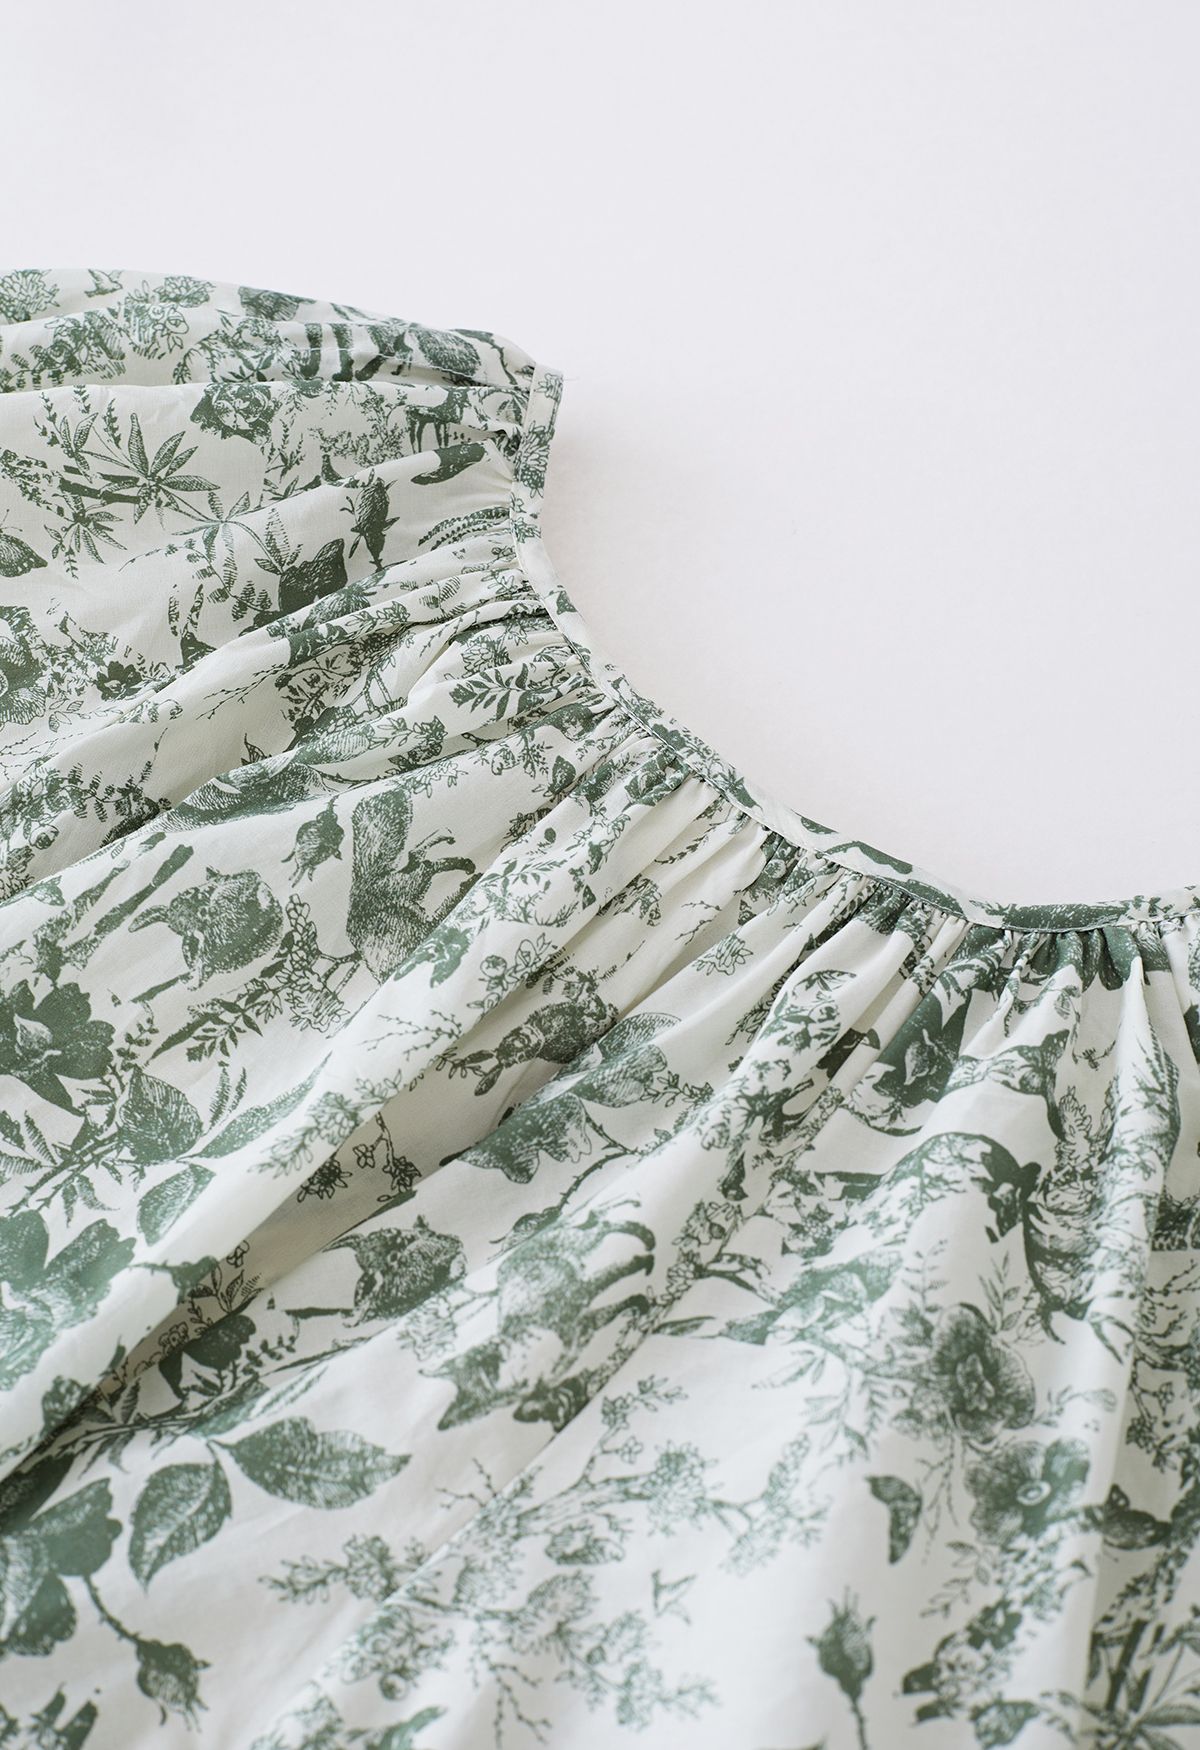 Spring Garden Printed Top and Maxi Skirt Set in Moss Green